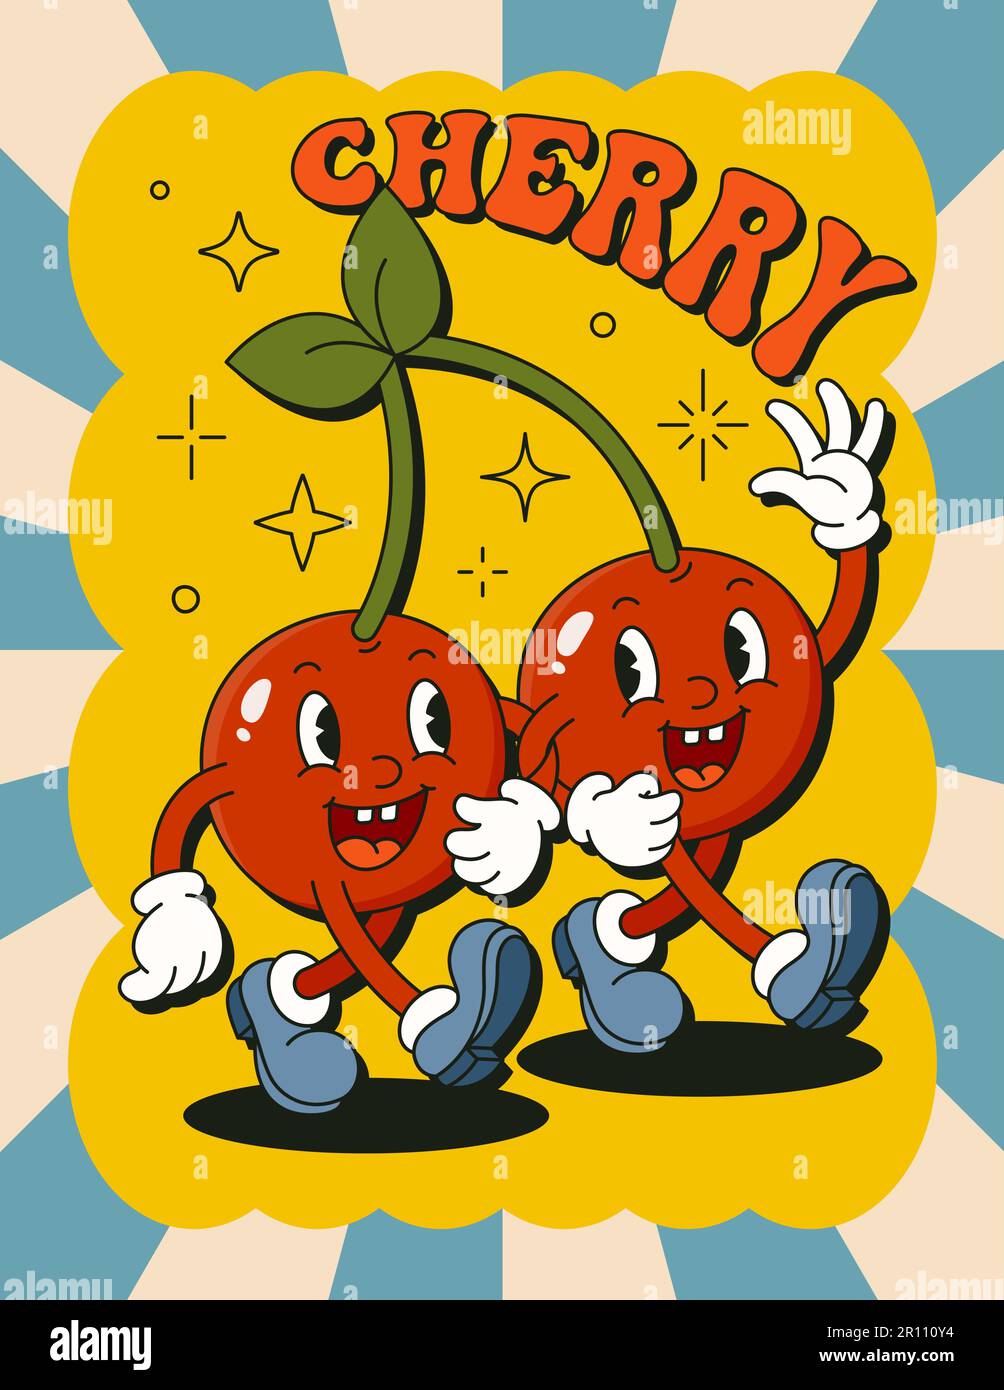 Retro Cartoon Character Cherry Poster. Vector Funny Comic Illustration in Trendy Groovy Style for T-Shirt Print, Wall Art, Case Phone, Notepad Cover, Stock Vector